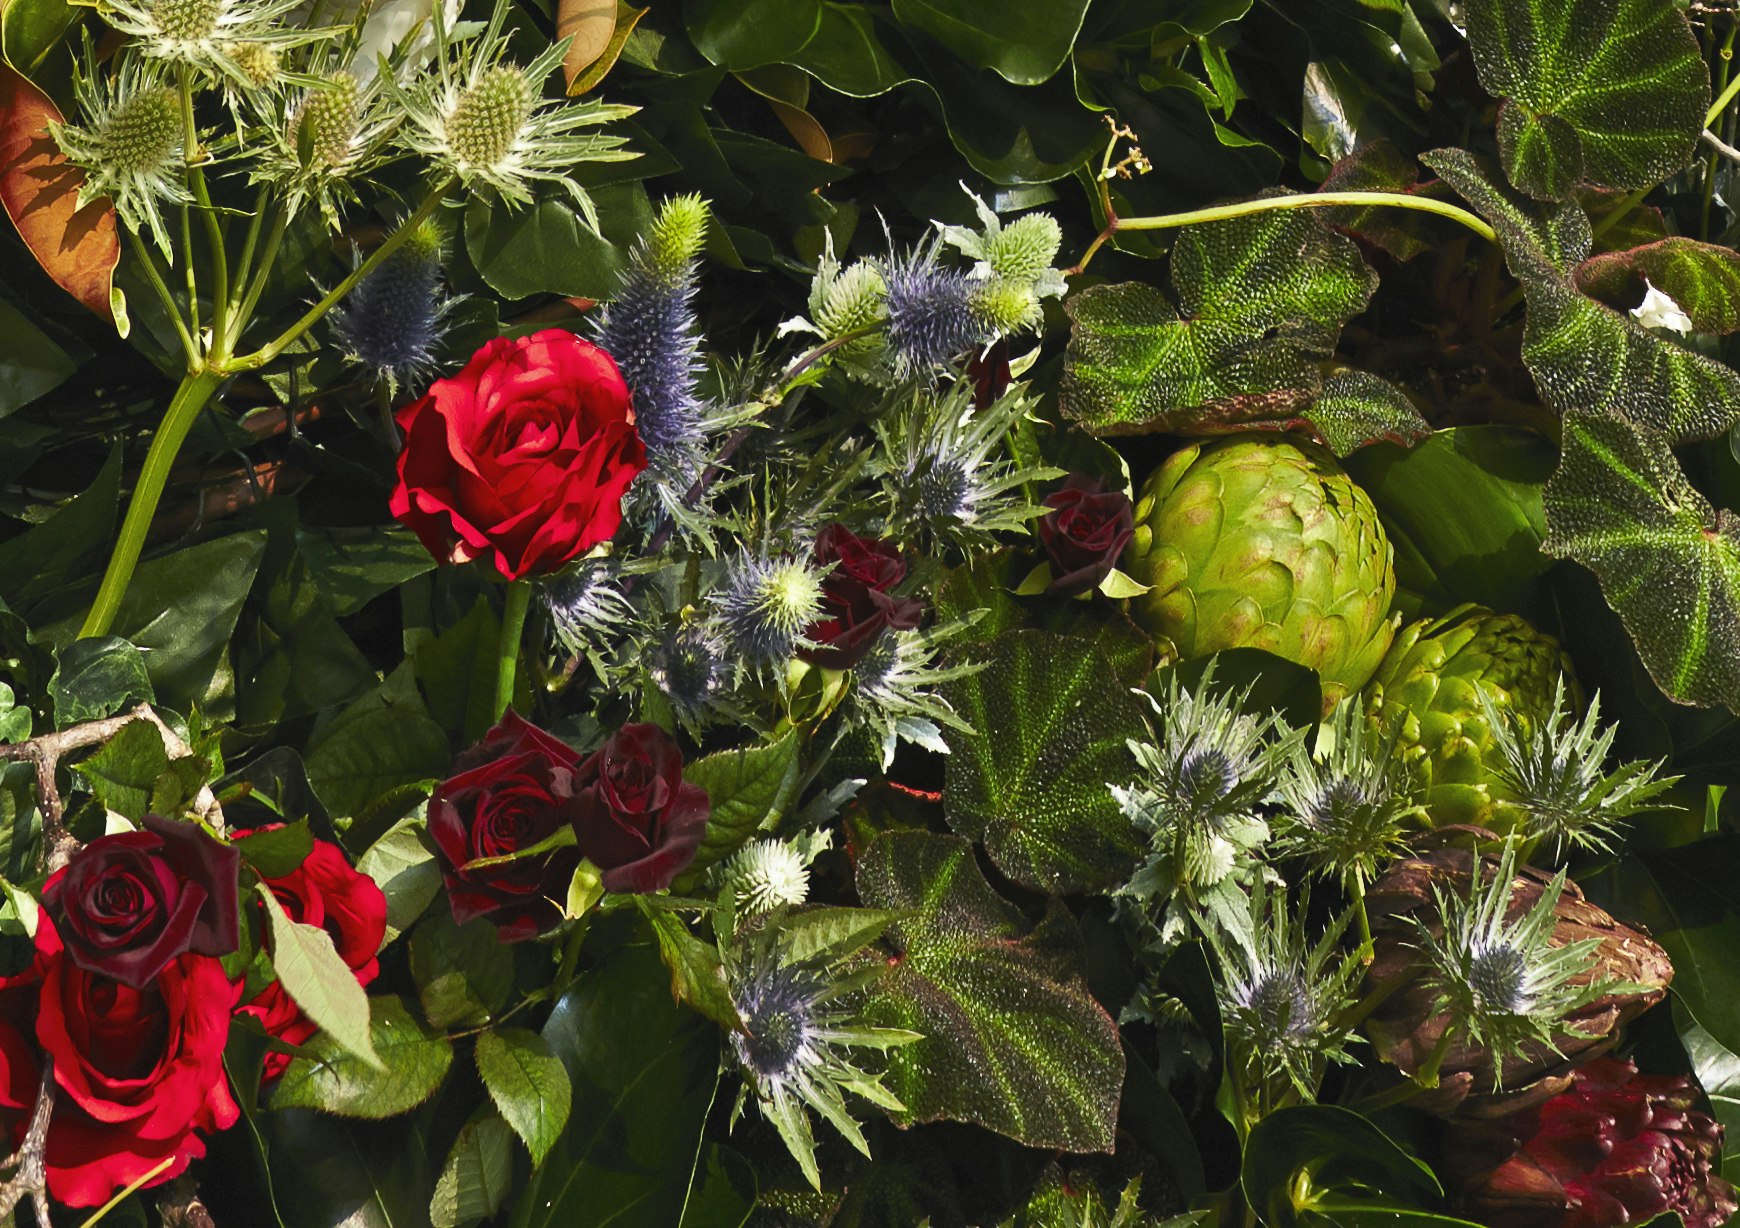 An arrangement of cut plants, including roses and thistles